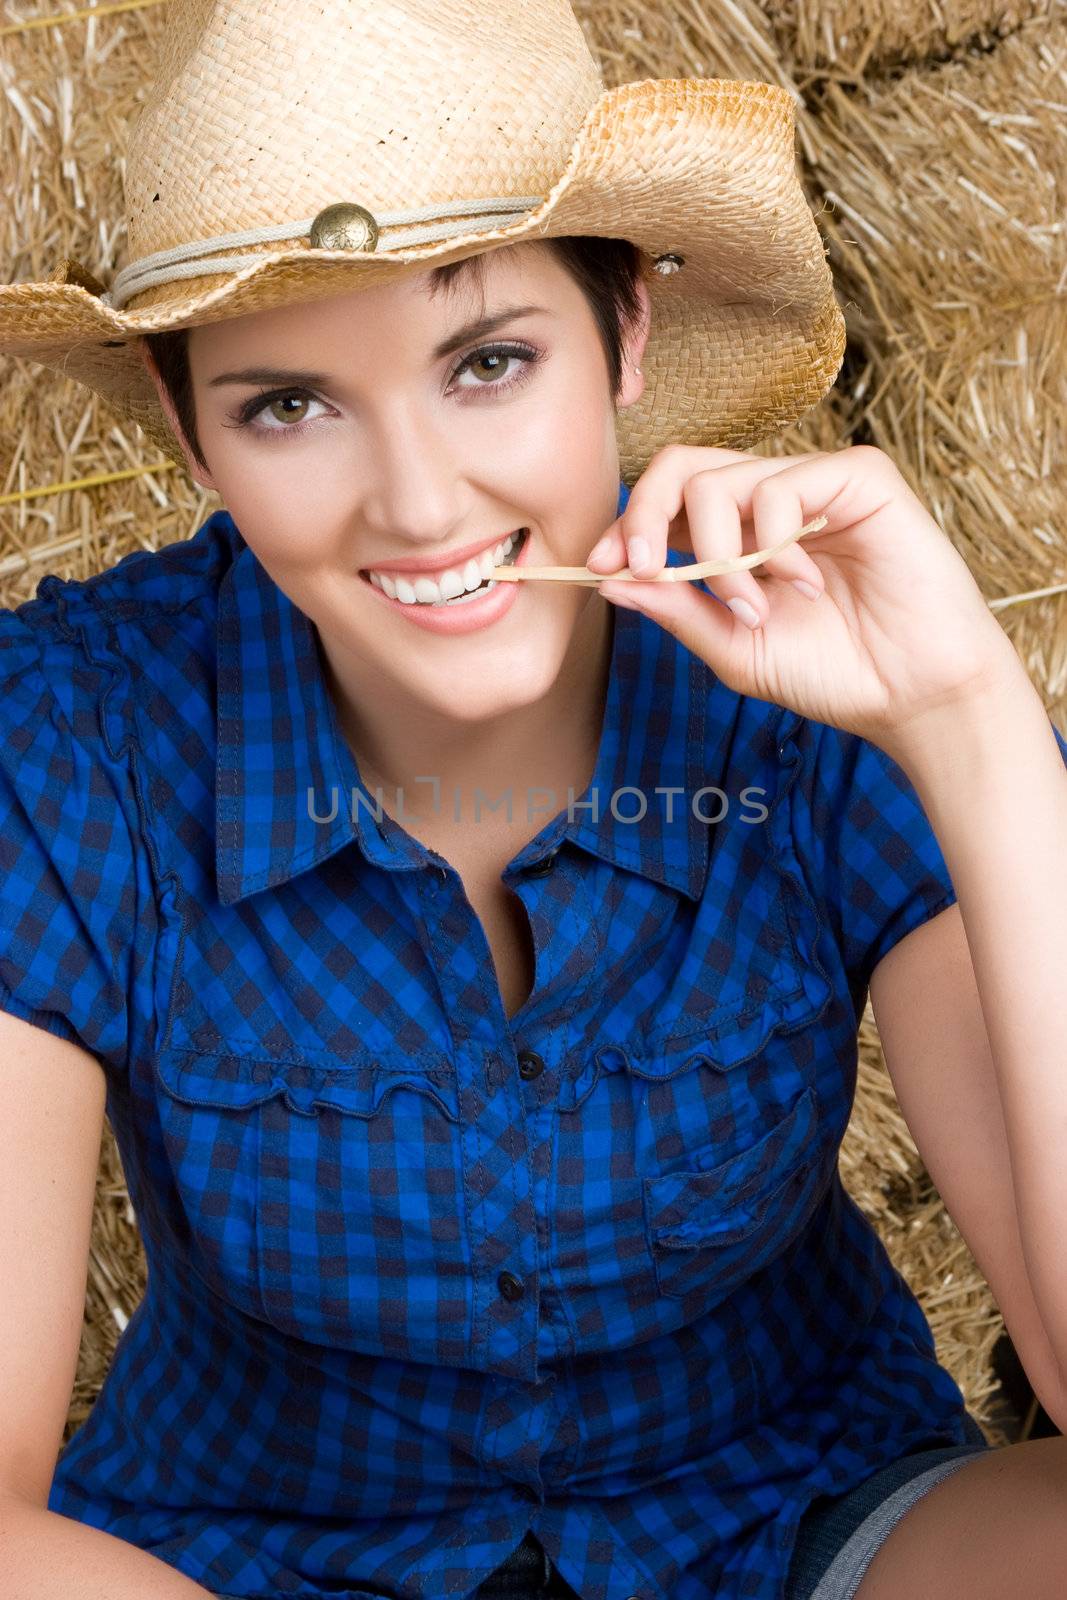 Country Girl by keeweeboy